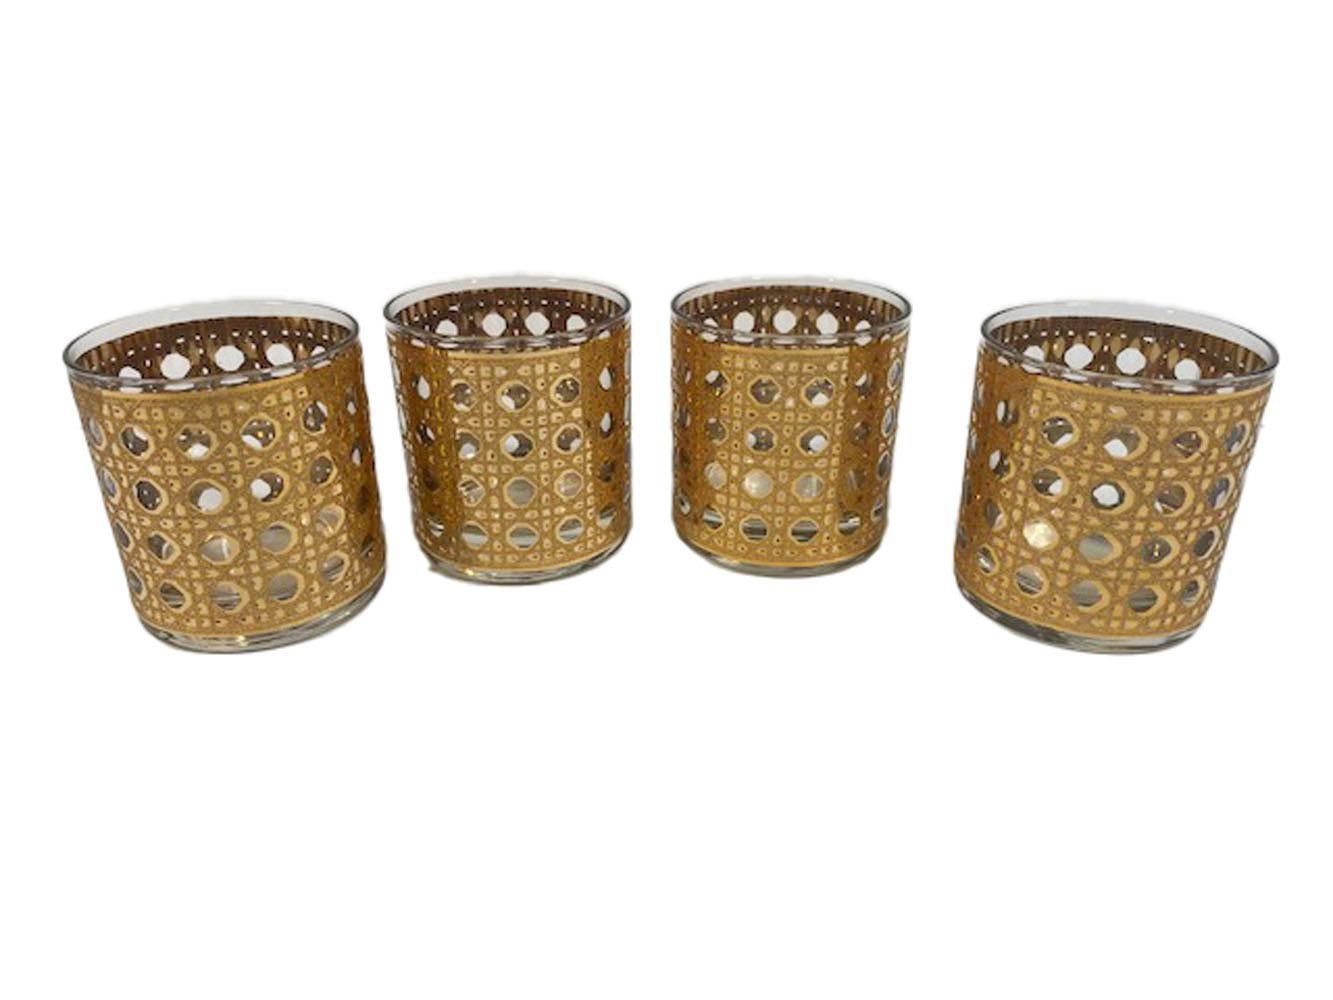 Six-piece cocktail set by Culver, LTD. in the 22 karat gold Canella pattern designed to resemble woven cane. The set consists of a handled cocktail pitcher with pinched pour spout, a glass stirring rod and four cocktail glasses.